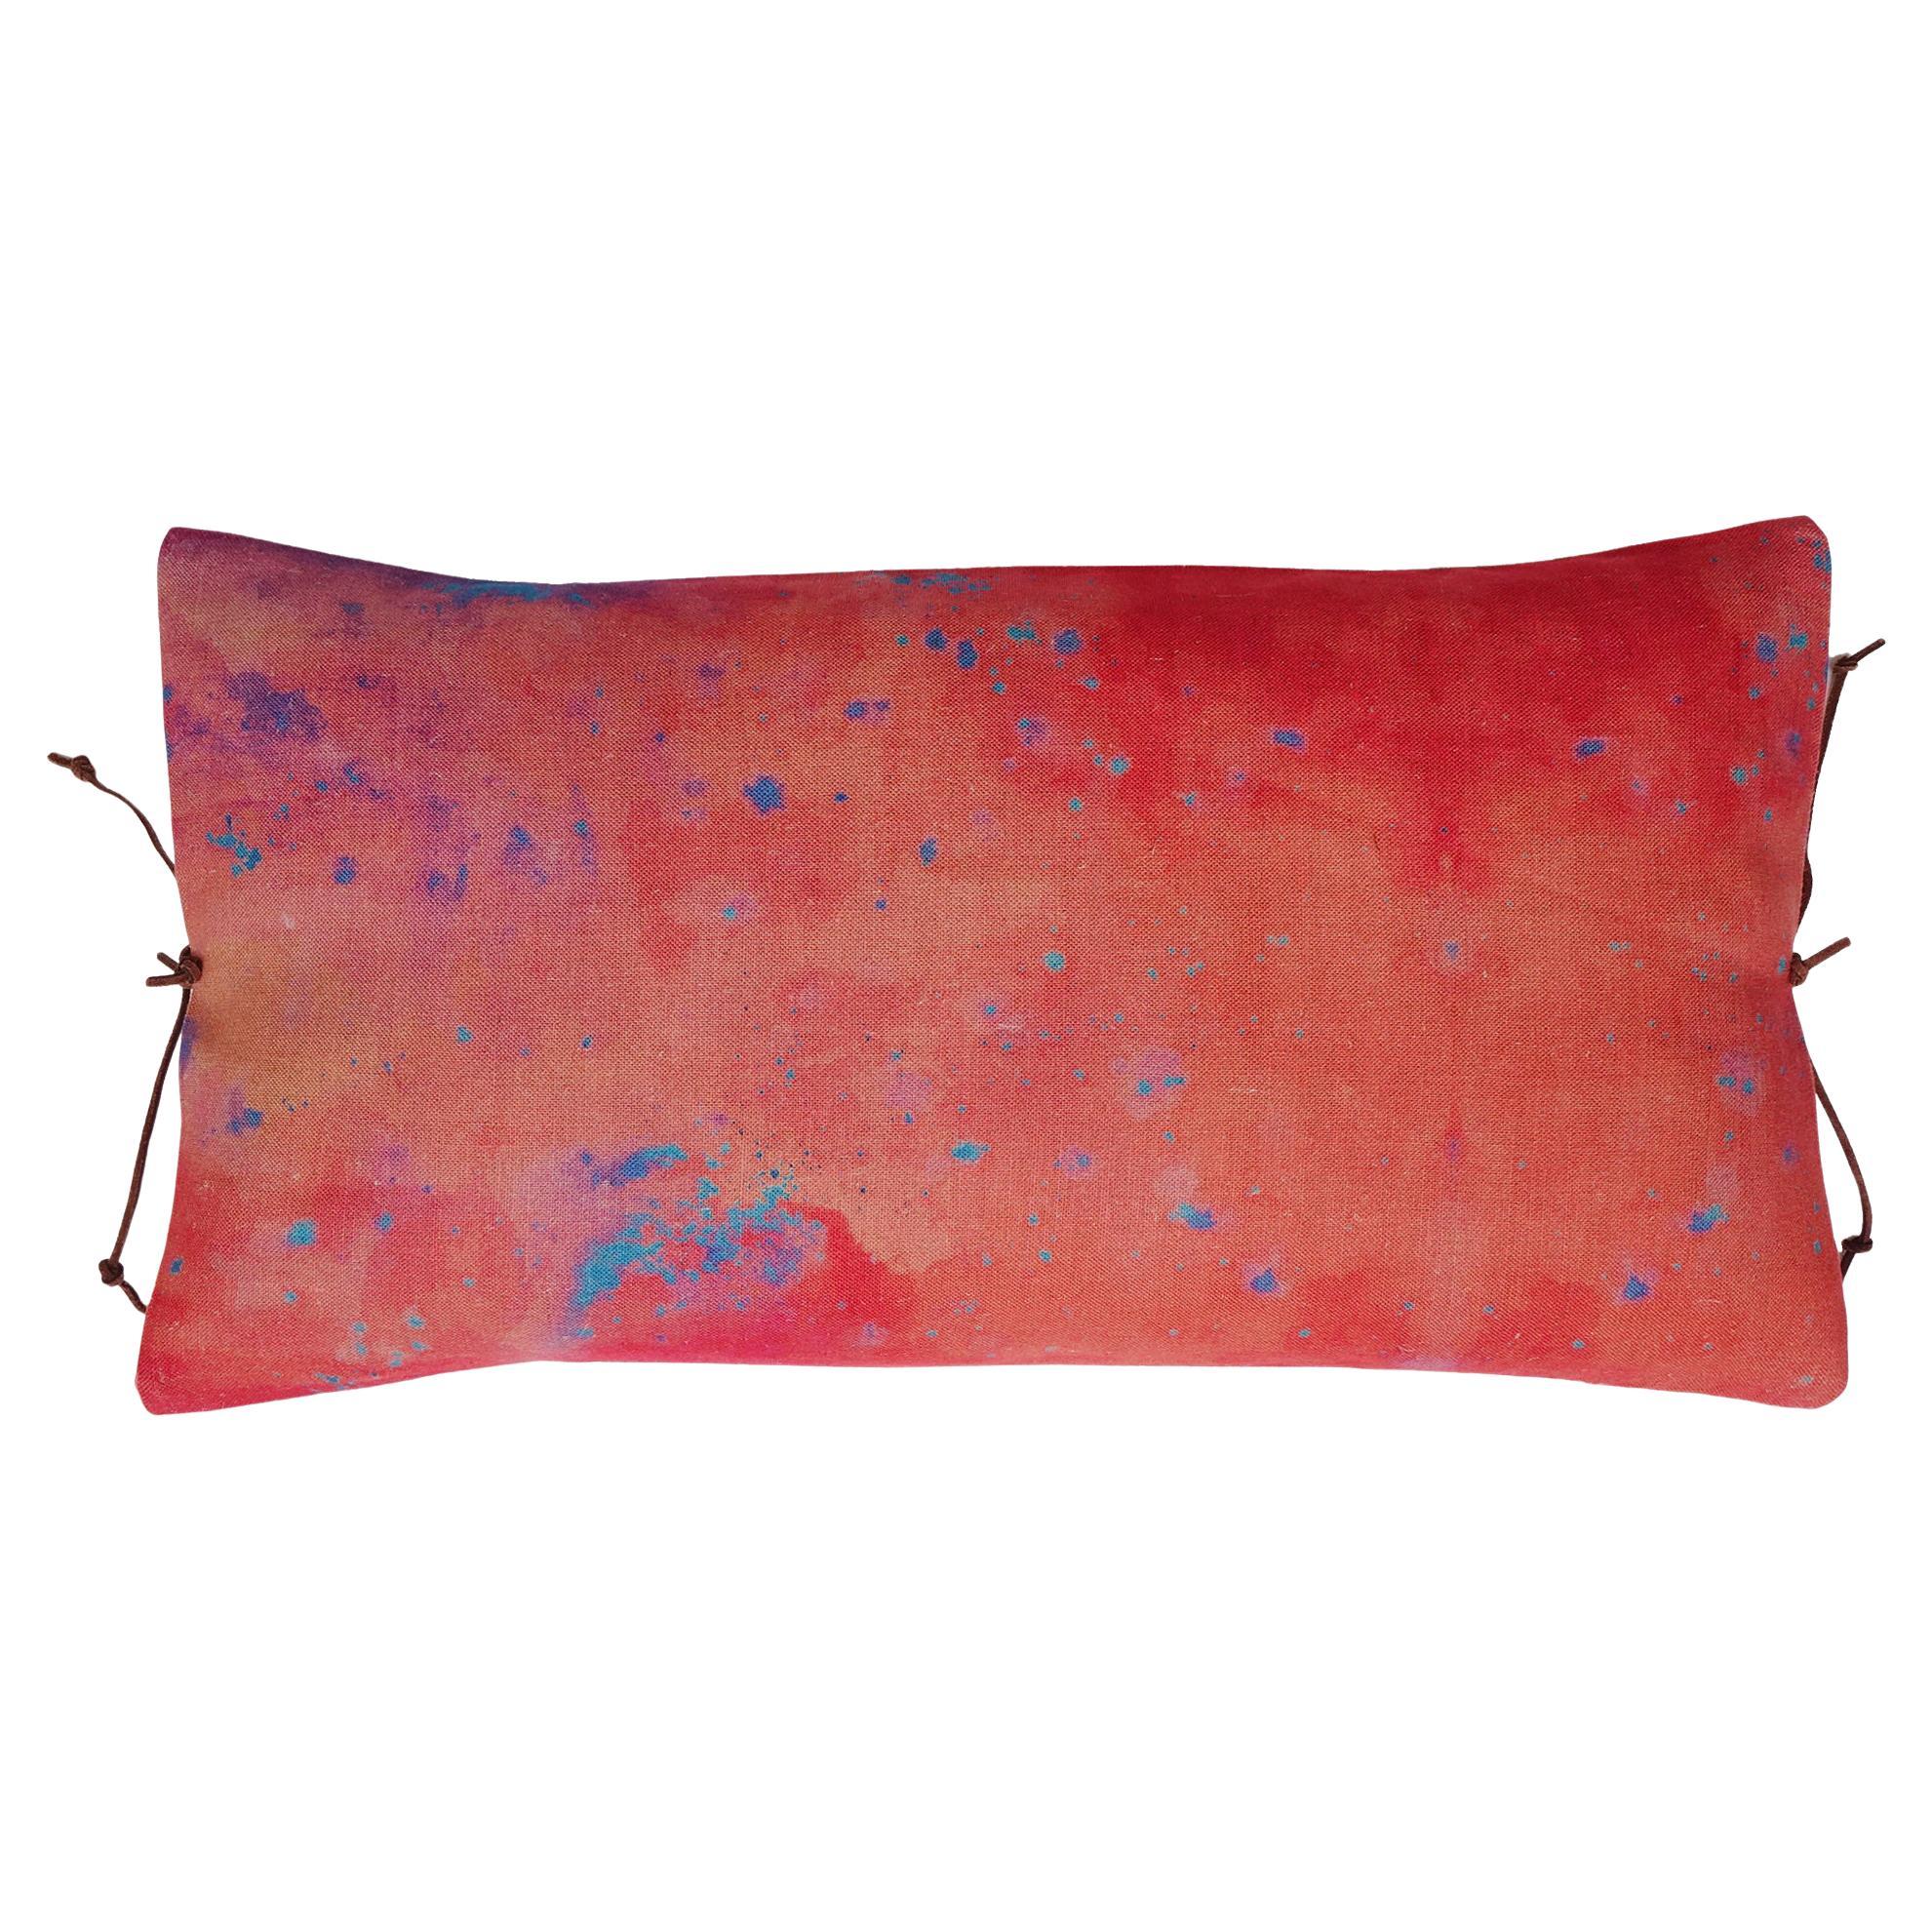 Printed Linen Pillow Cloudy Rosehip For Sale